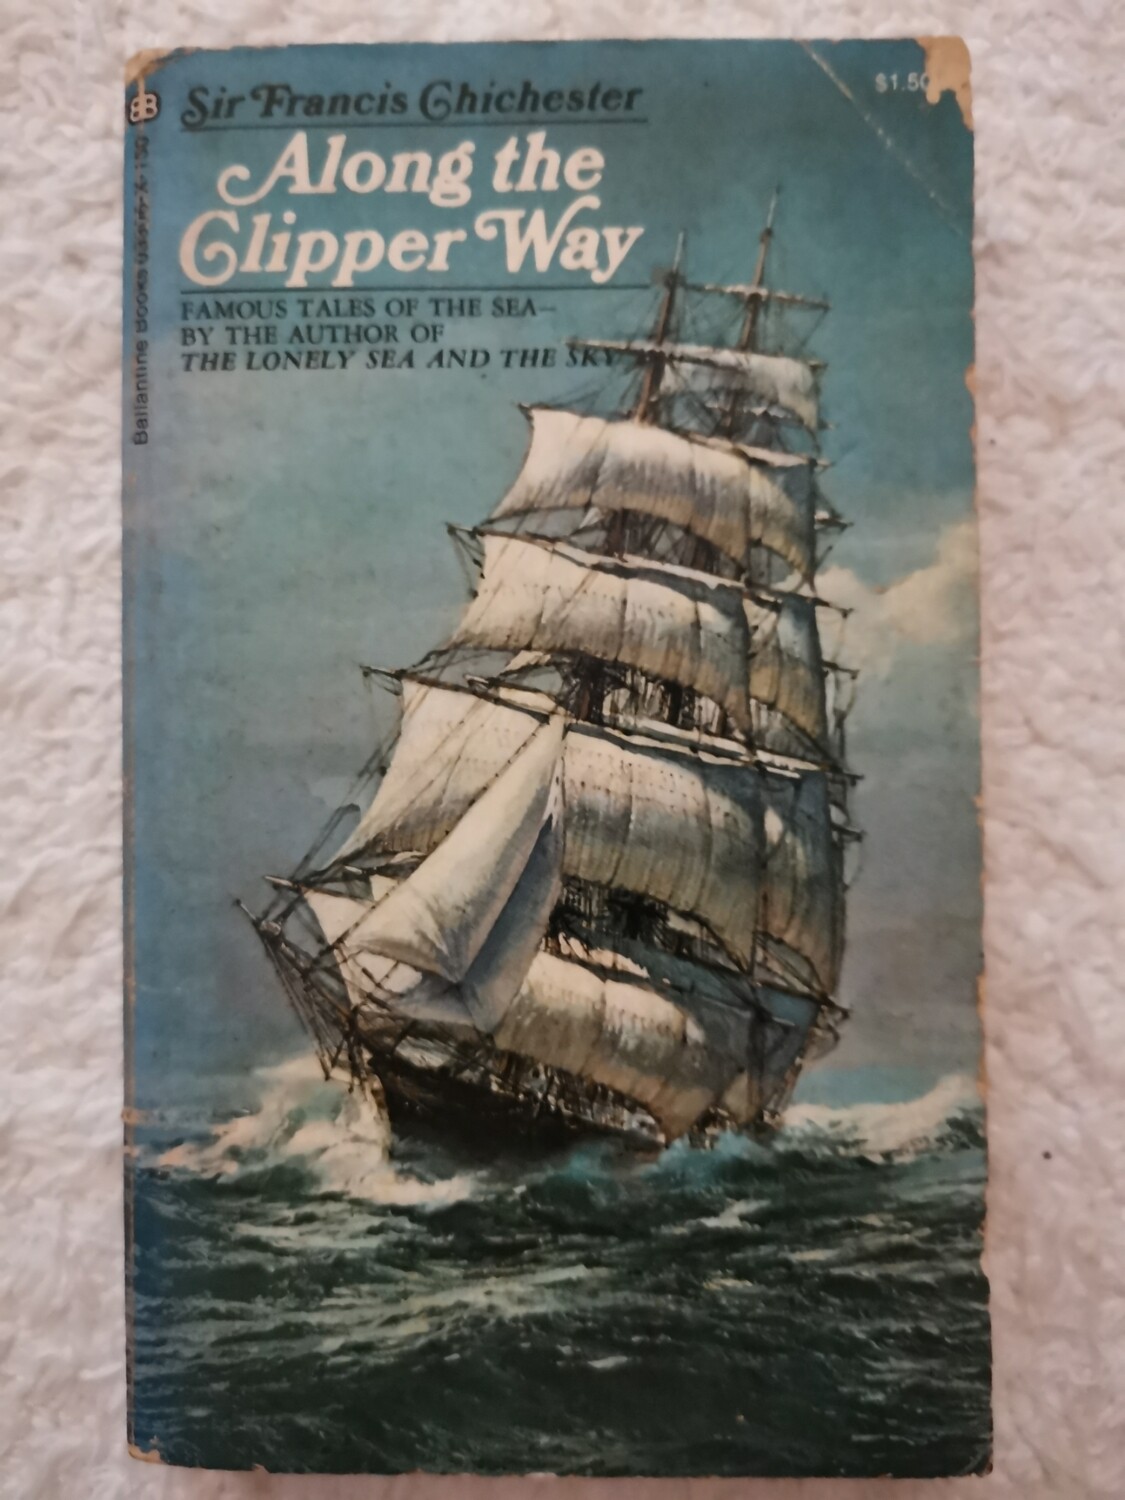 Along the clipper way, Sir Francis Chichester